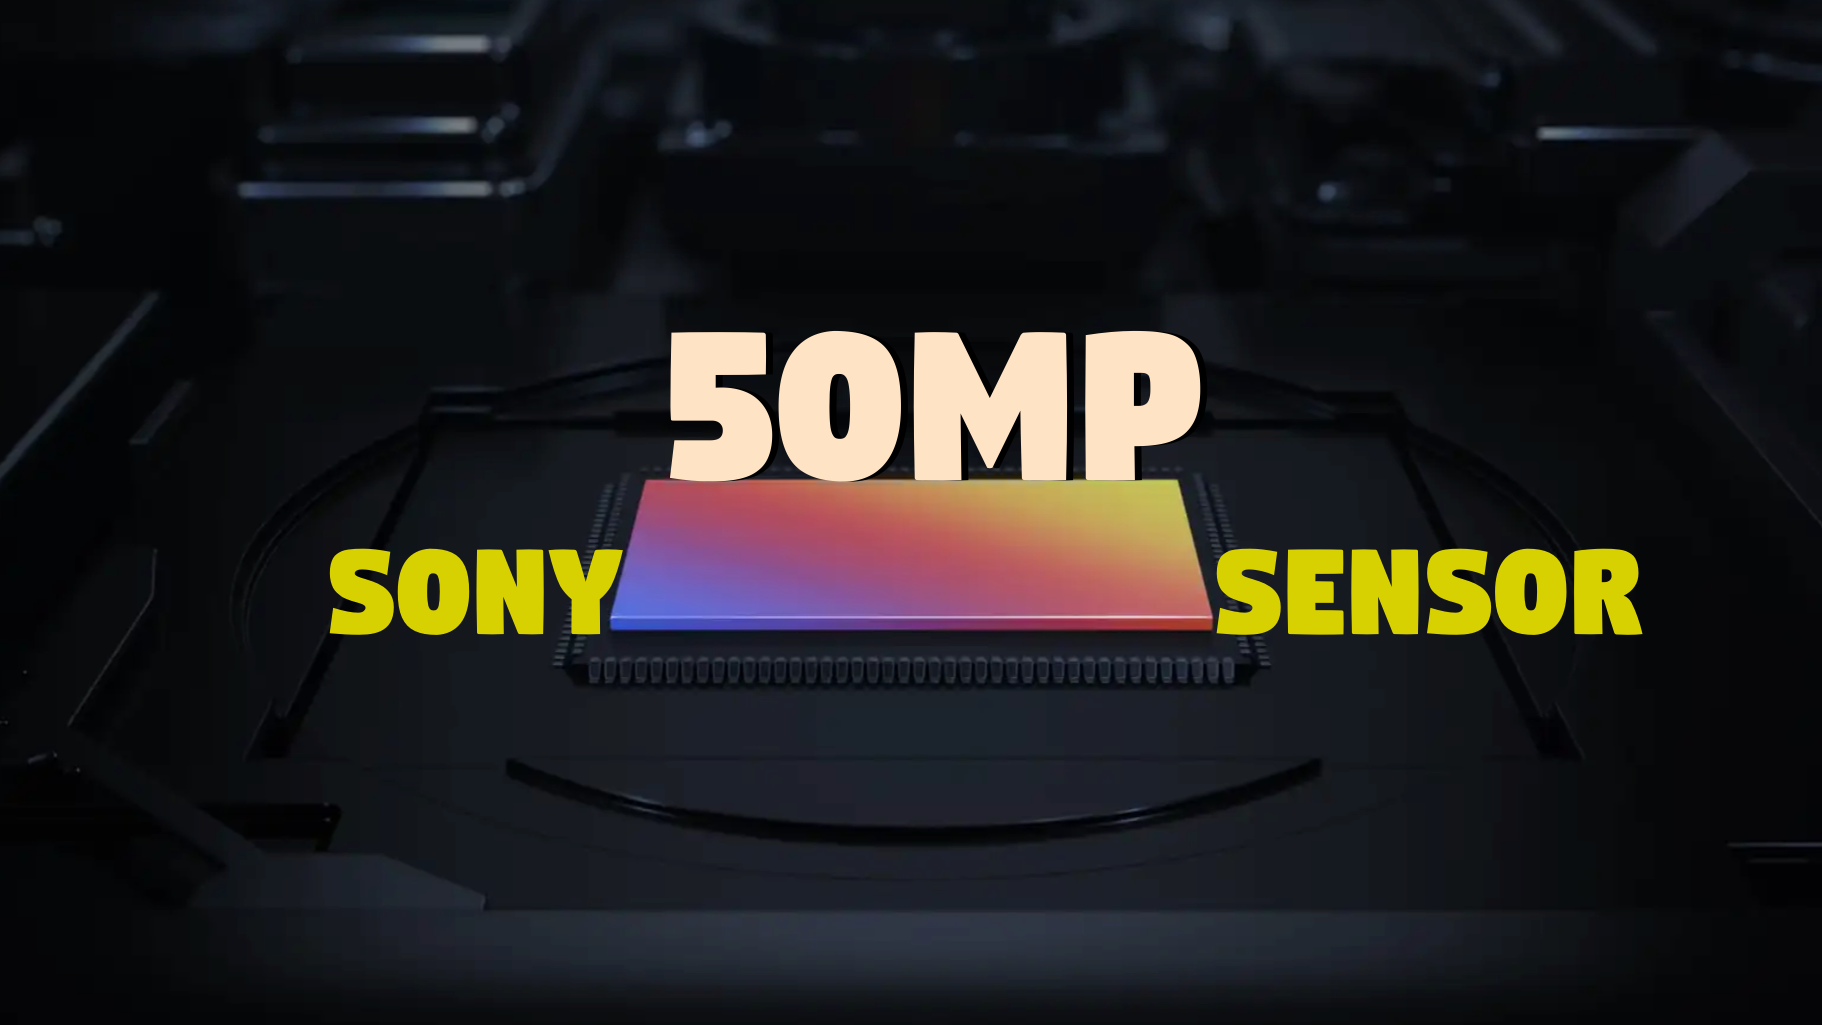 The new 50MP Sony sensor is expected to elevate the camera experience on Google's new flagship phone, and challenge Samsung, Apple, and Xiaomi. - Google Pixel 6 Pro and its 122MP camera system: The 4-year wait for 4 new cameras